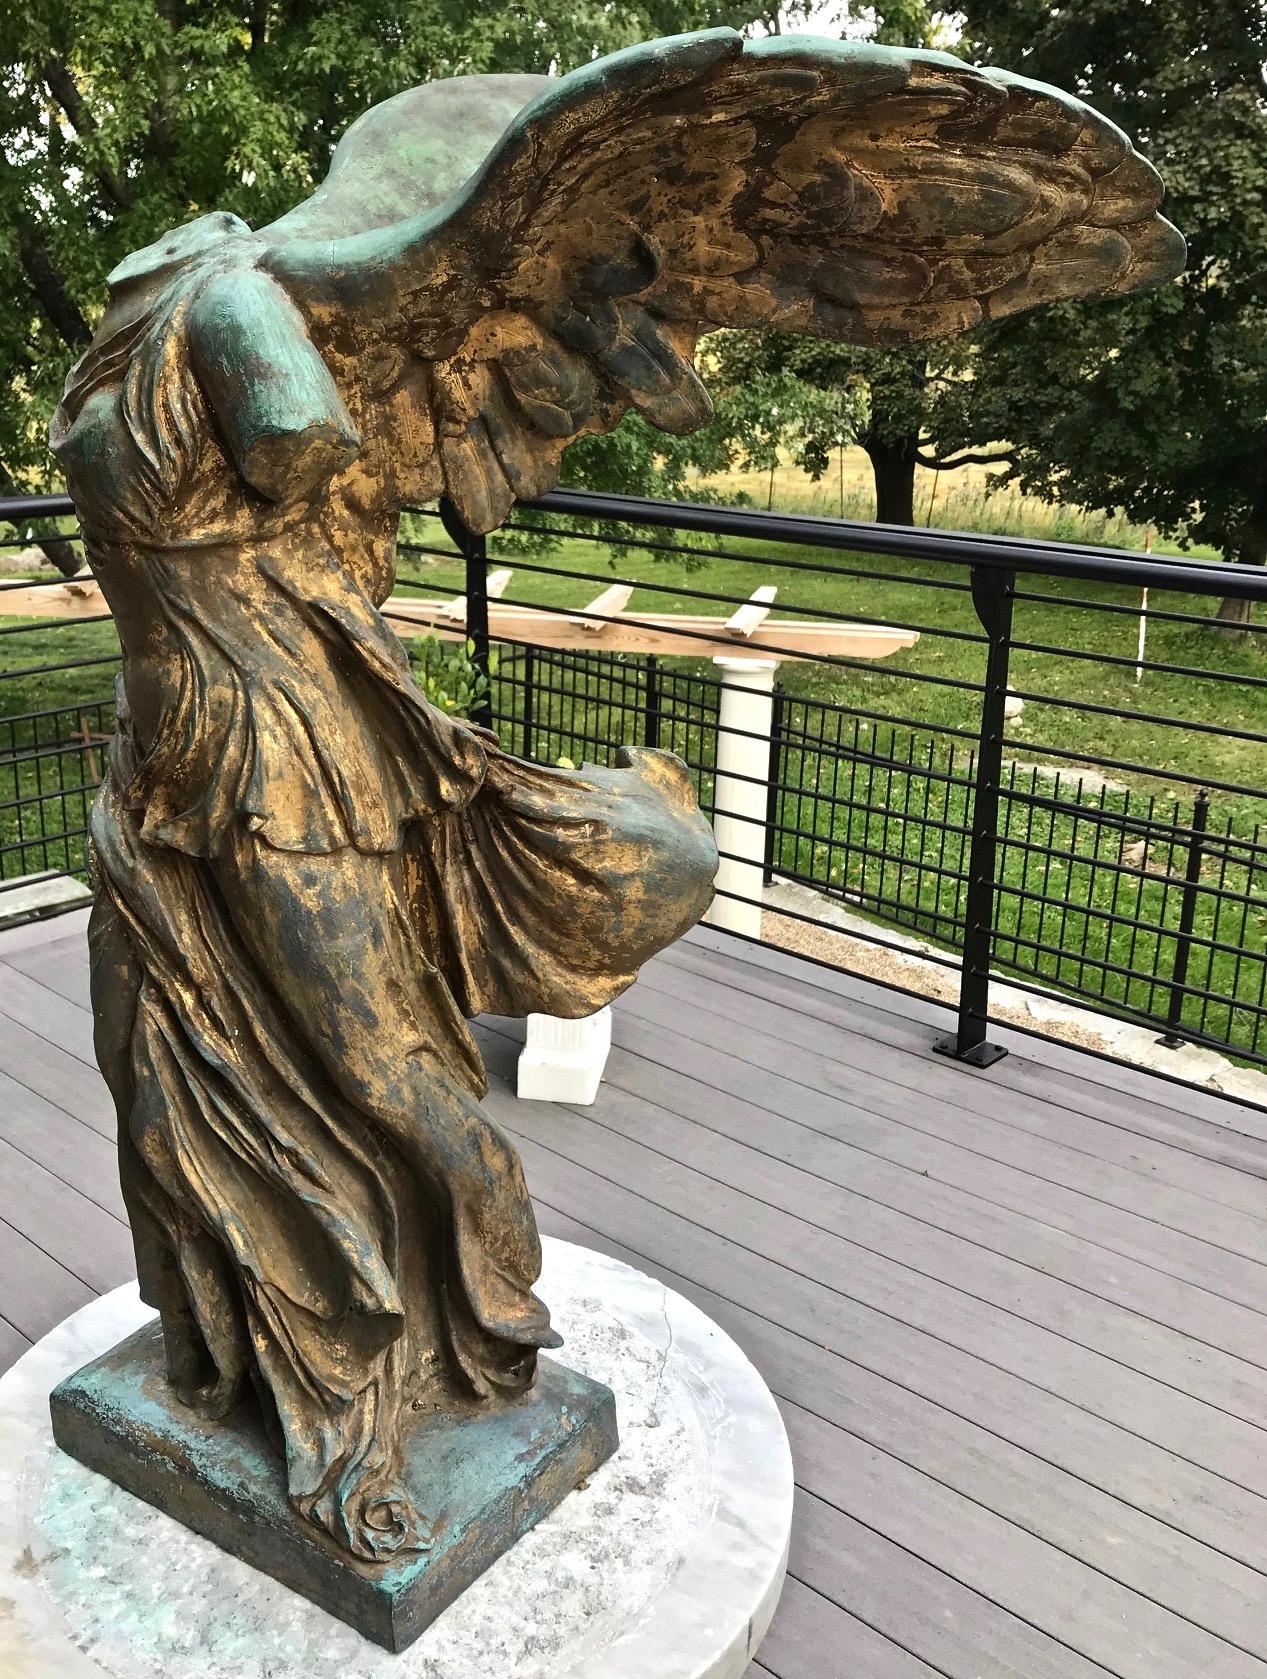 A 19th century French patinated bronze sculpture of the Nike of Samothrace. 

Copied from The Winged Victory of Samothrace, also called the Nike of Samothrace, a marble Hellenistic sculpture of Nike (the Greek goddess of victory), that was created